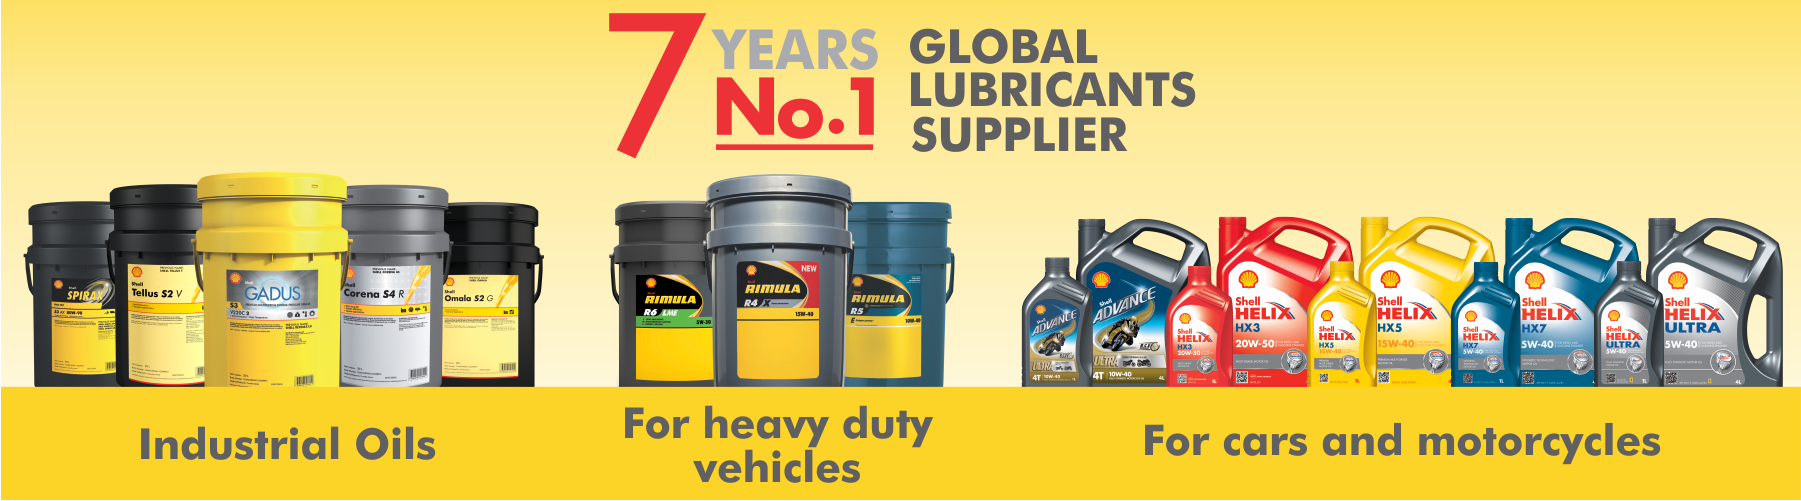 Shell Lubricants launches virtual assistance for answers seeking customers